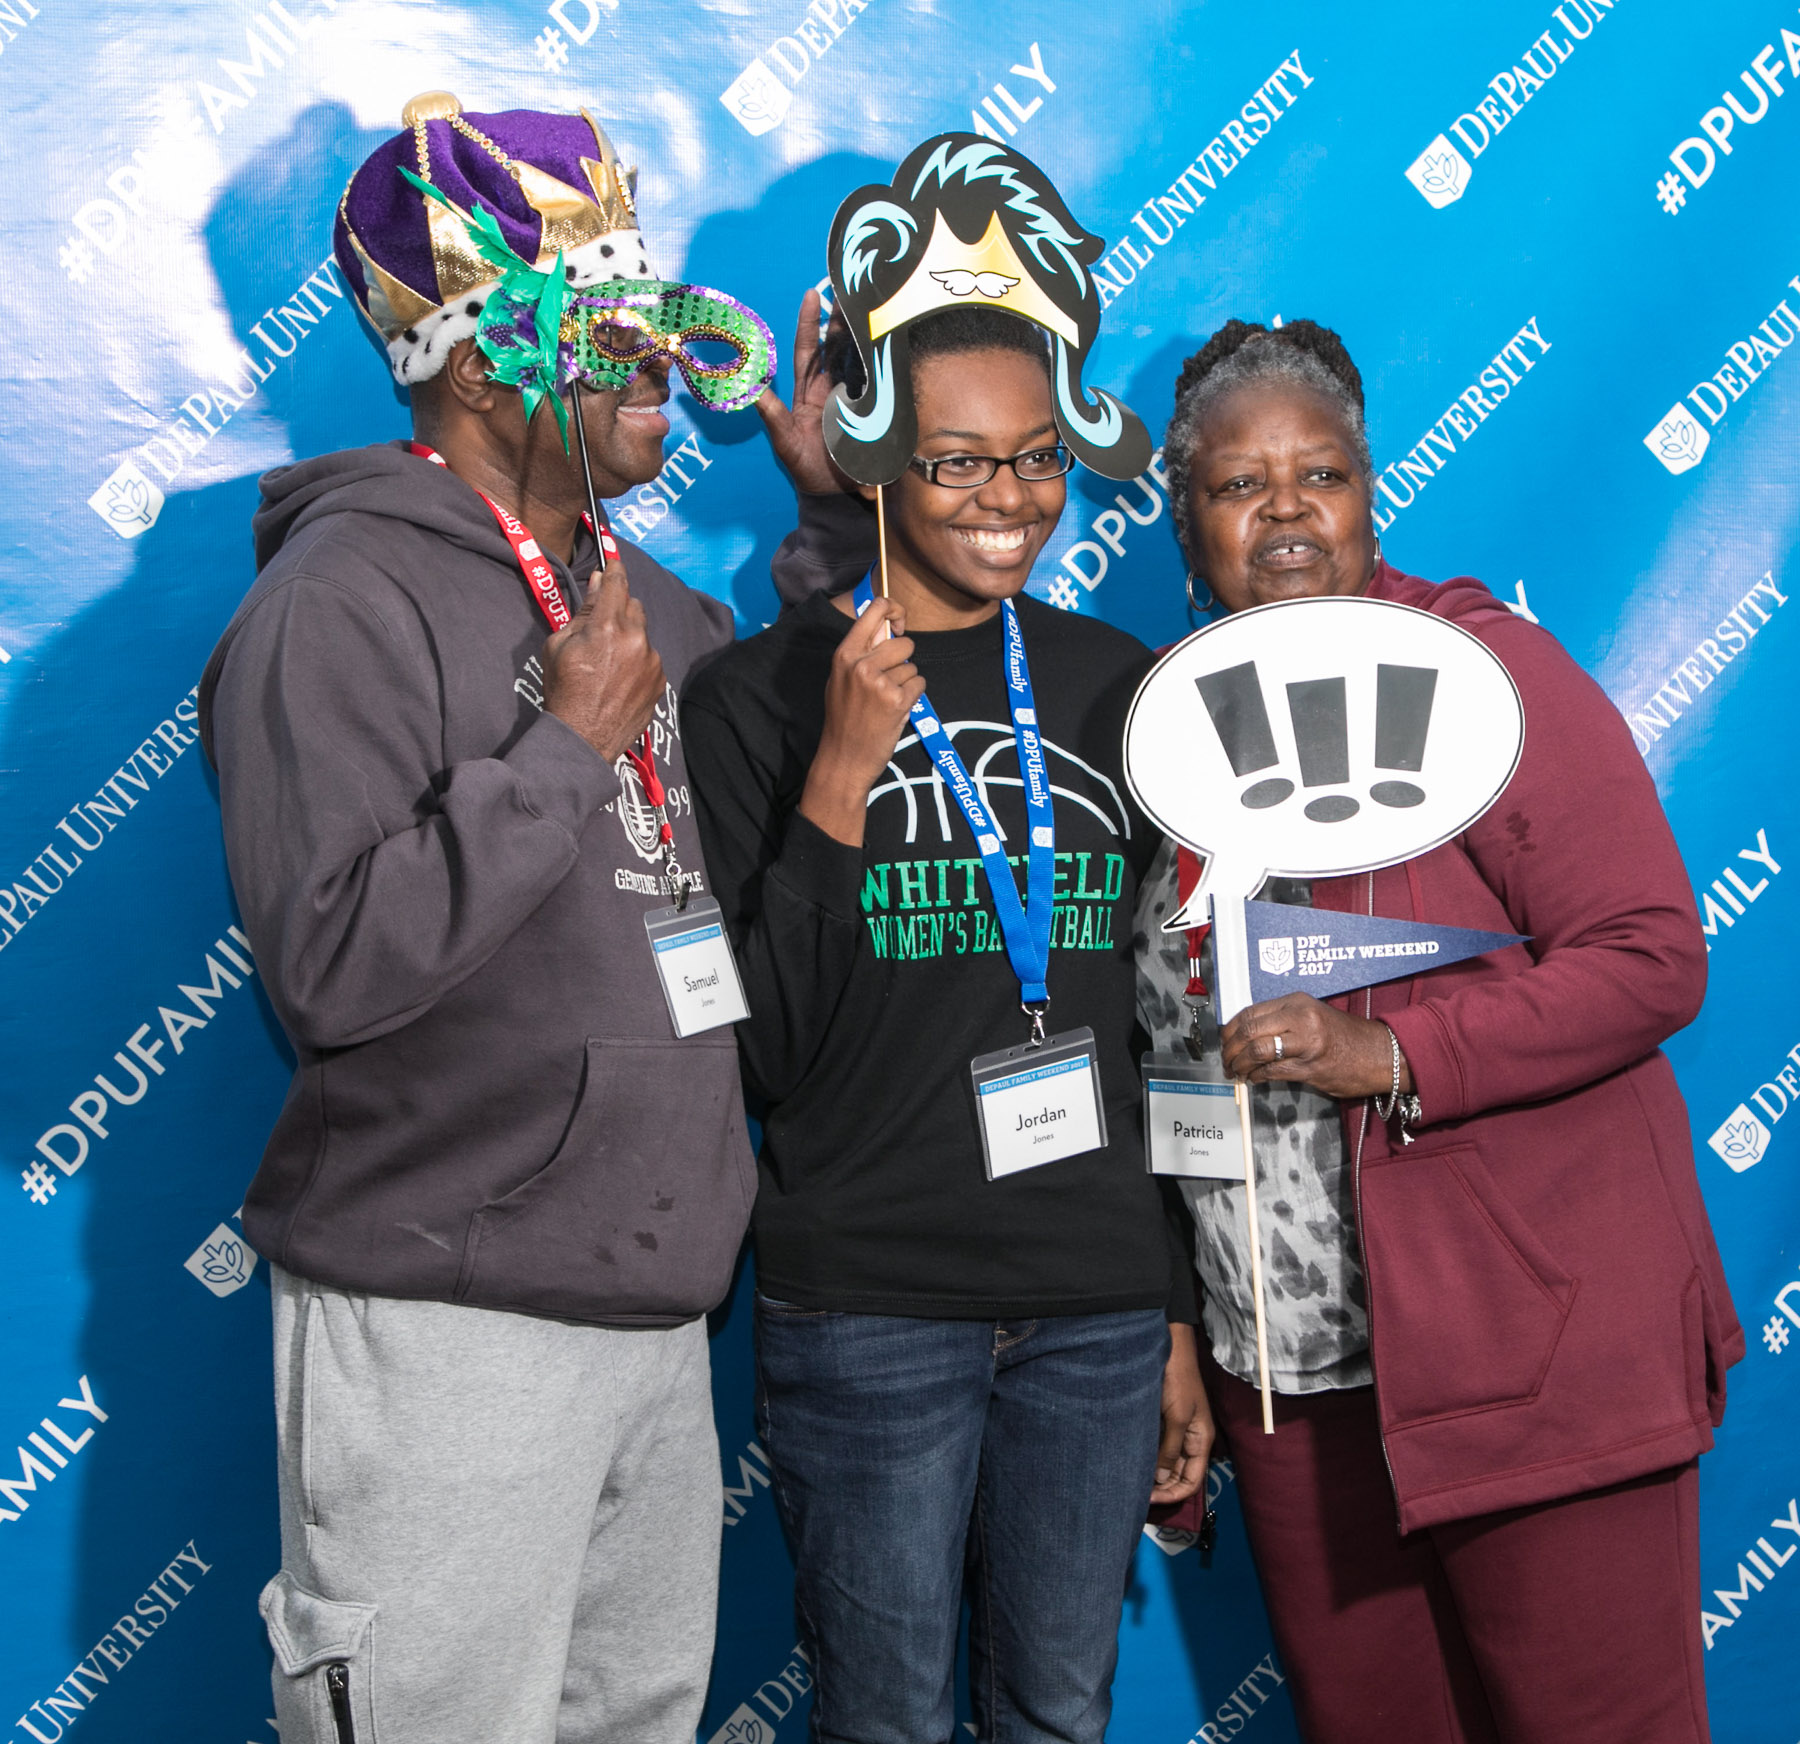 Sam, Jordan and Patricia Jones, left to right, pose for a photo as DePaul students and family members arrive at the Family Weekend Kickoff celebration. (DePaul University/Jamie Moncrief)